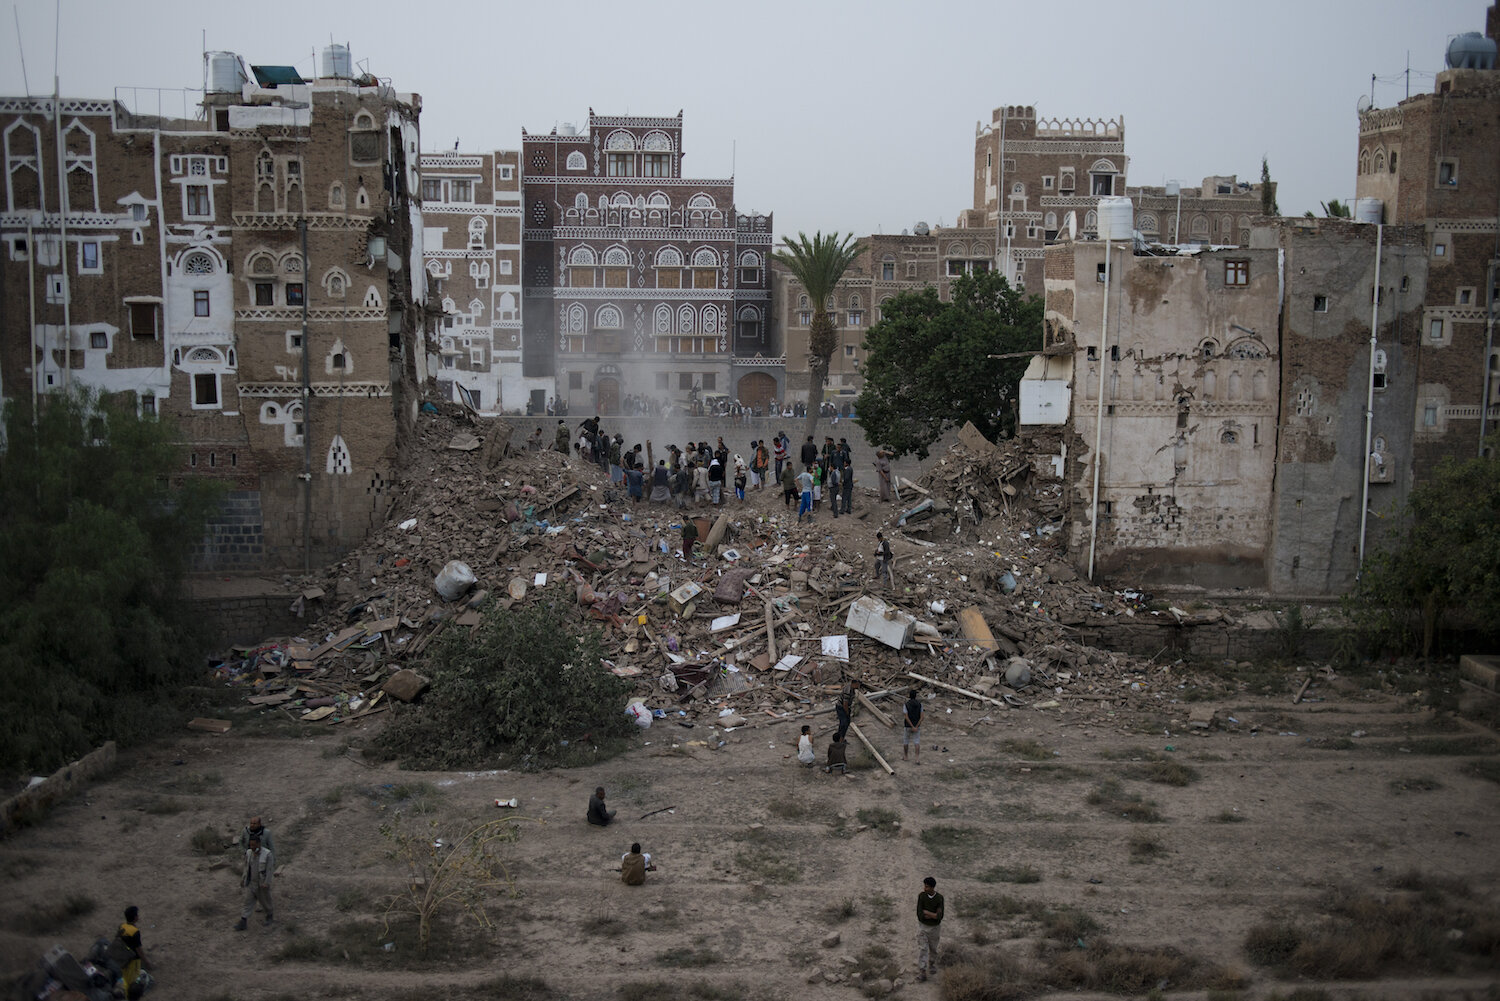  Rescuers, mostly neighbors and local men, attempt to dig a family out of a collapsed home in the Old City on Friday, June 12, 2015 in Sana'a, Yemen. Four houses collapsed after a Saudi airstrike in the city. It is unclear if an unexploded rocked lan